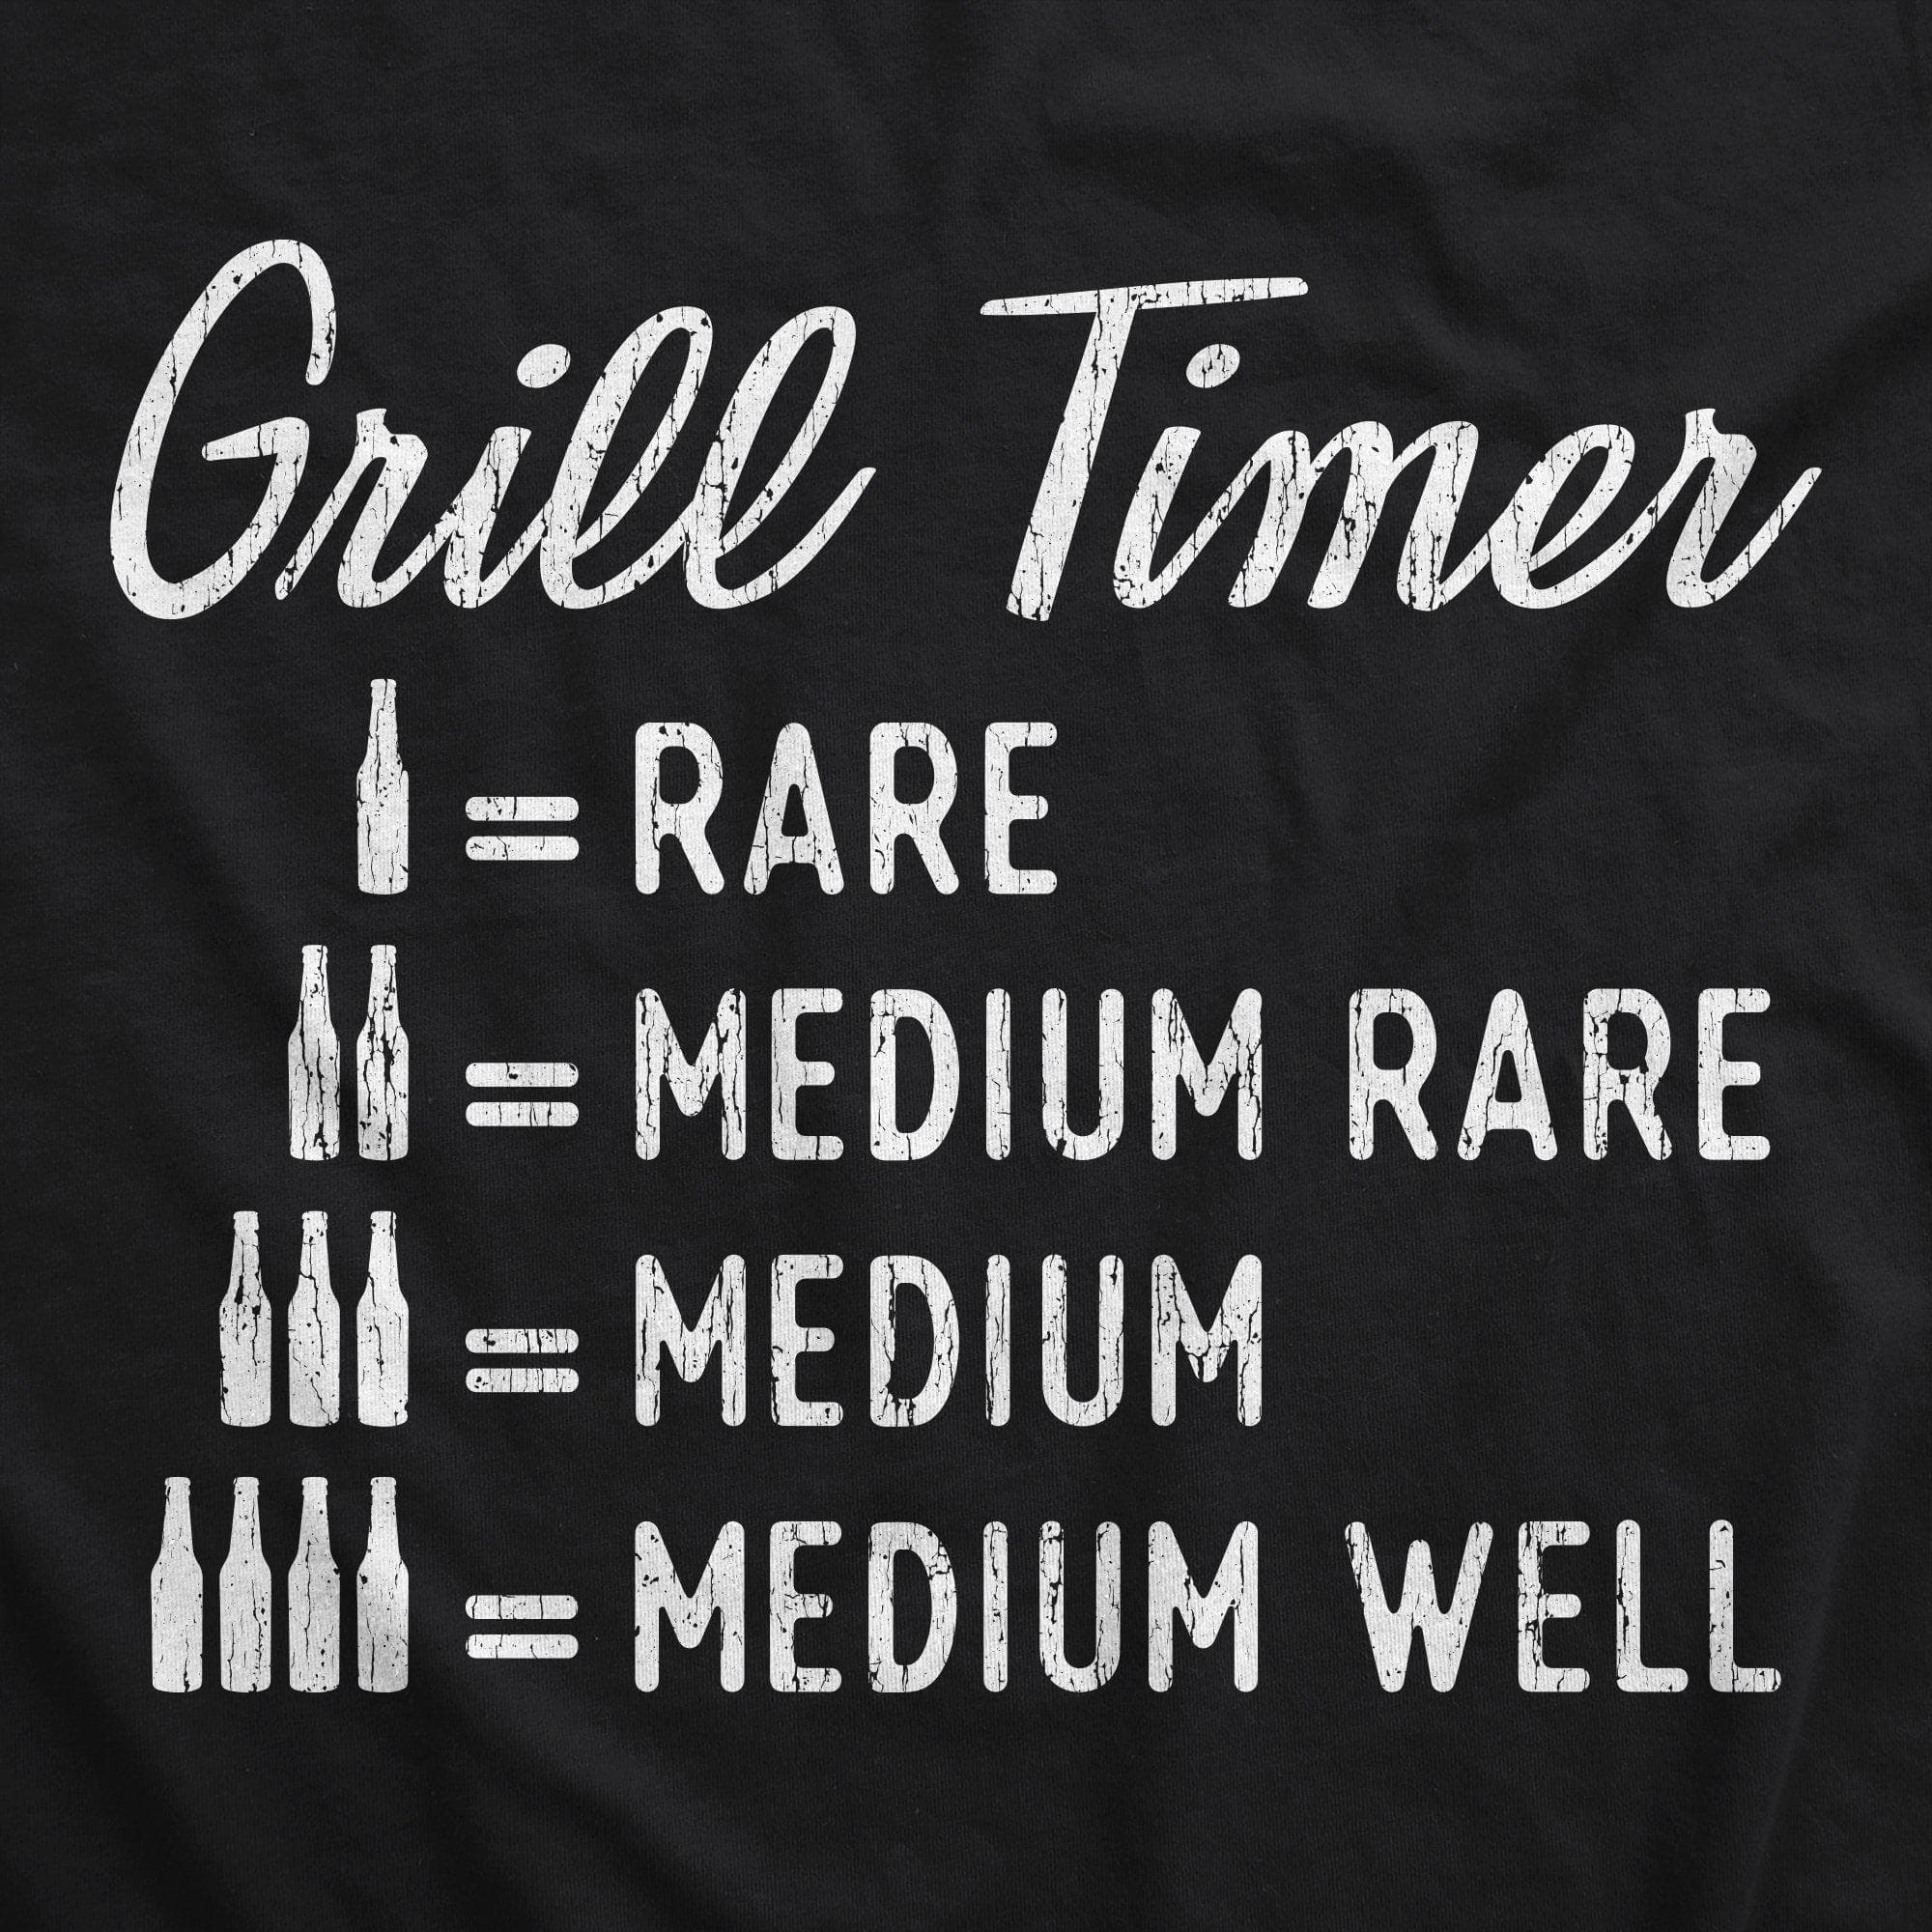 Beer Grill Timer Cookout Apron - Crazy Dog T-Shirts